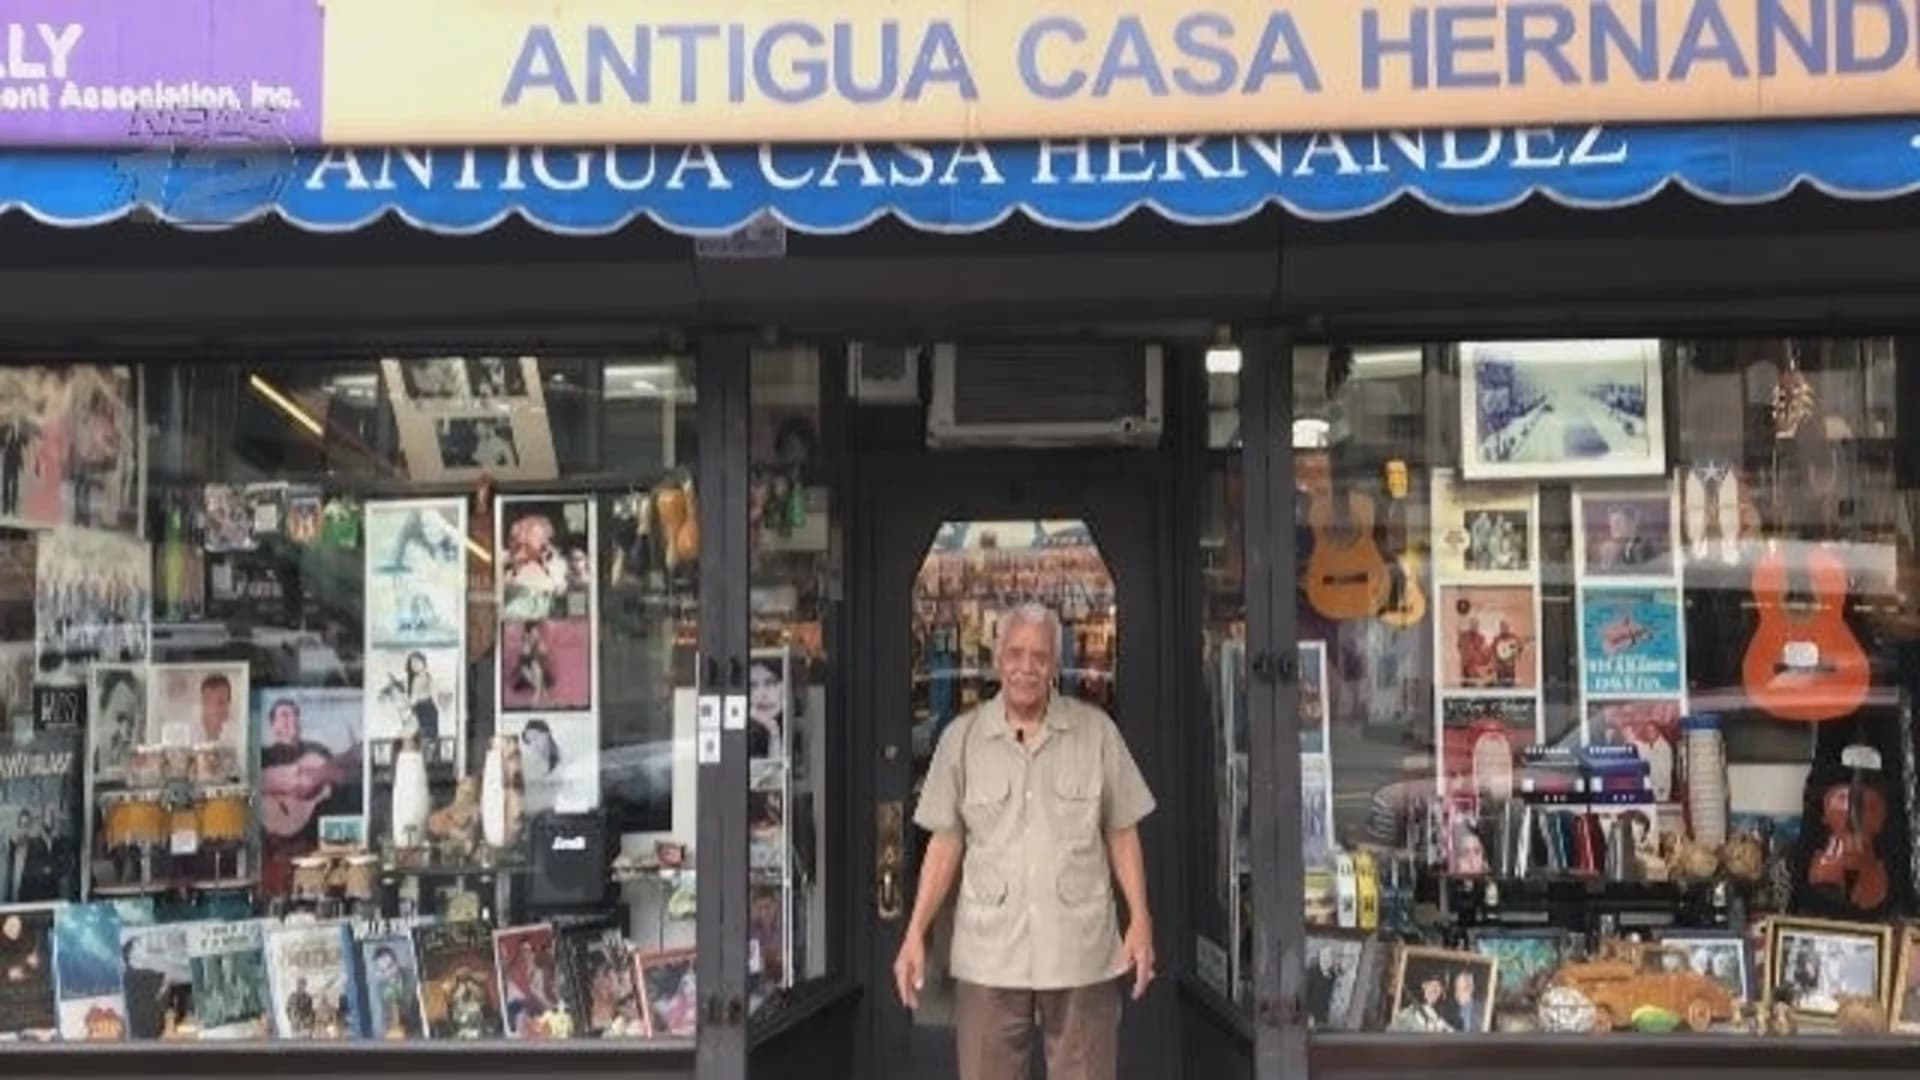 South Bronx store offers treasure trove of Latin music